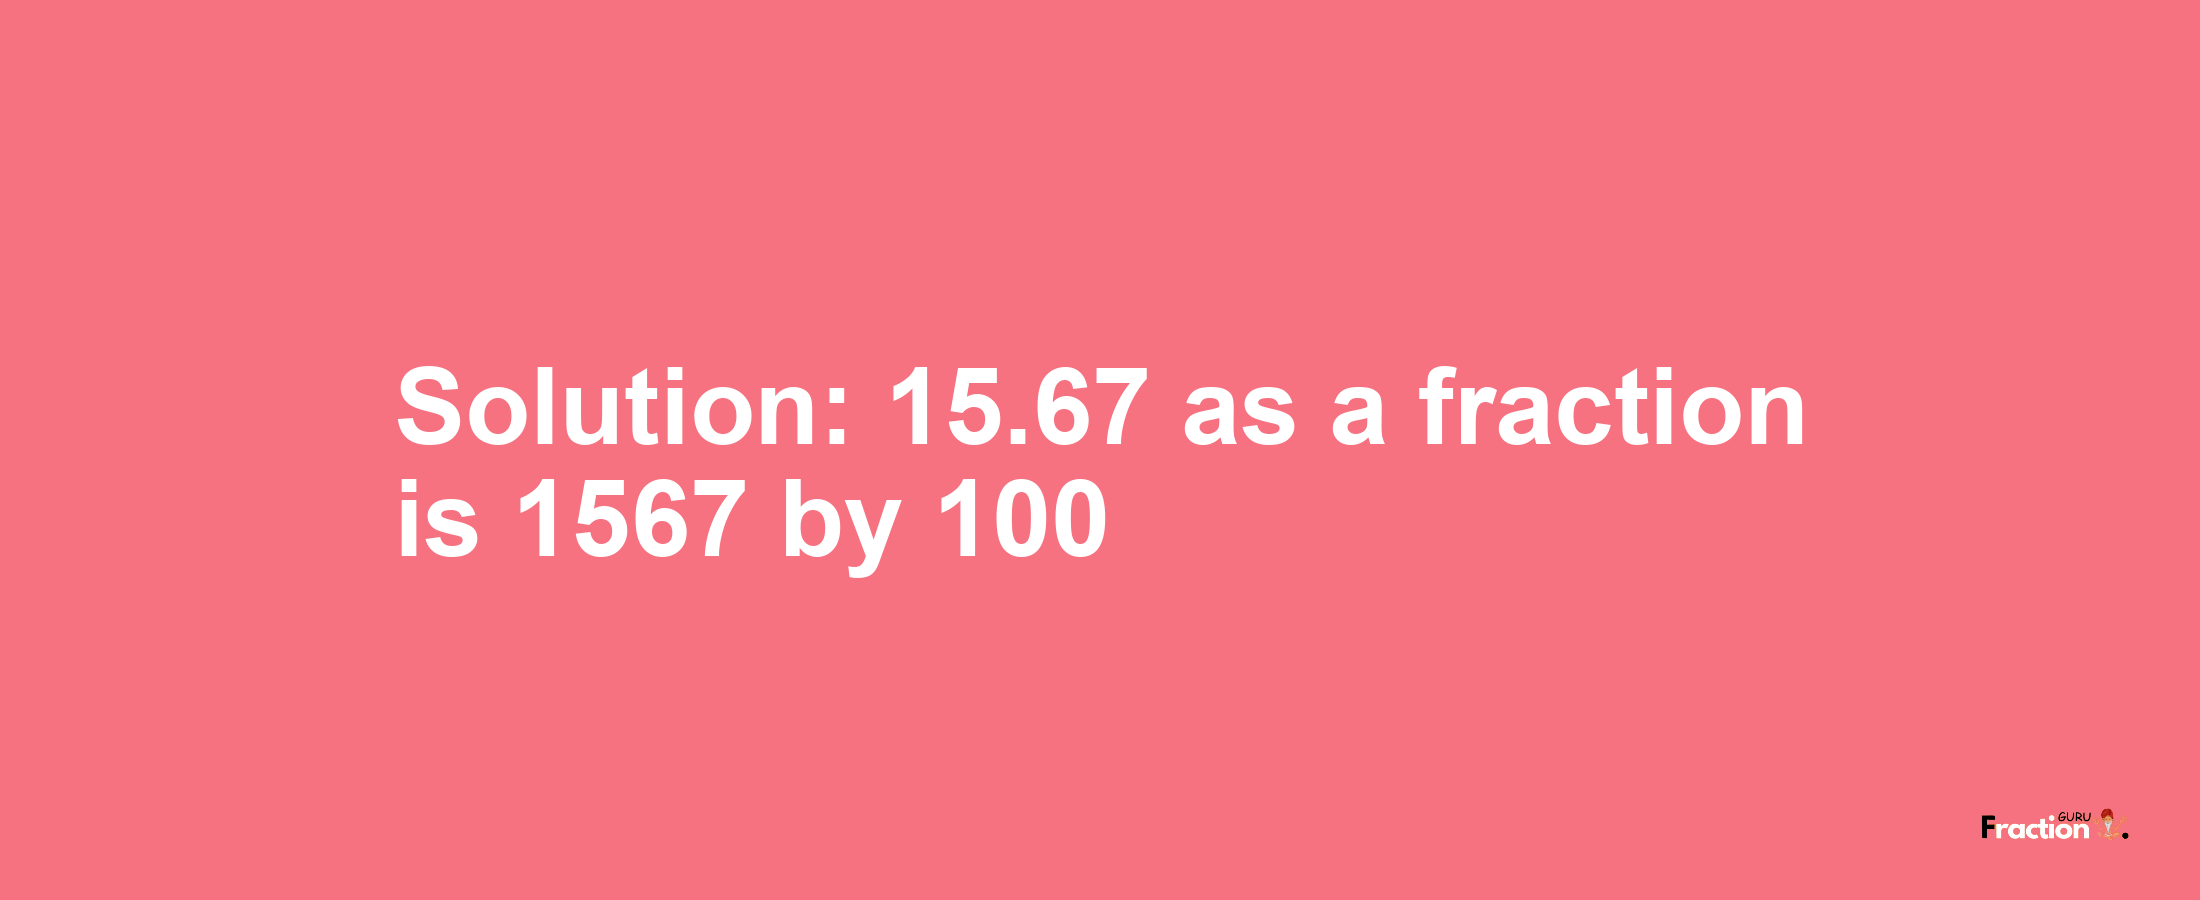 Solution:15.67 as a fraction is 1567/100